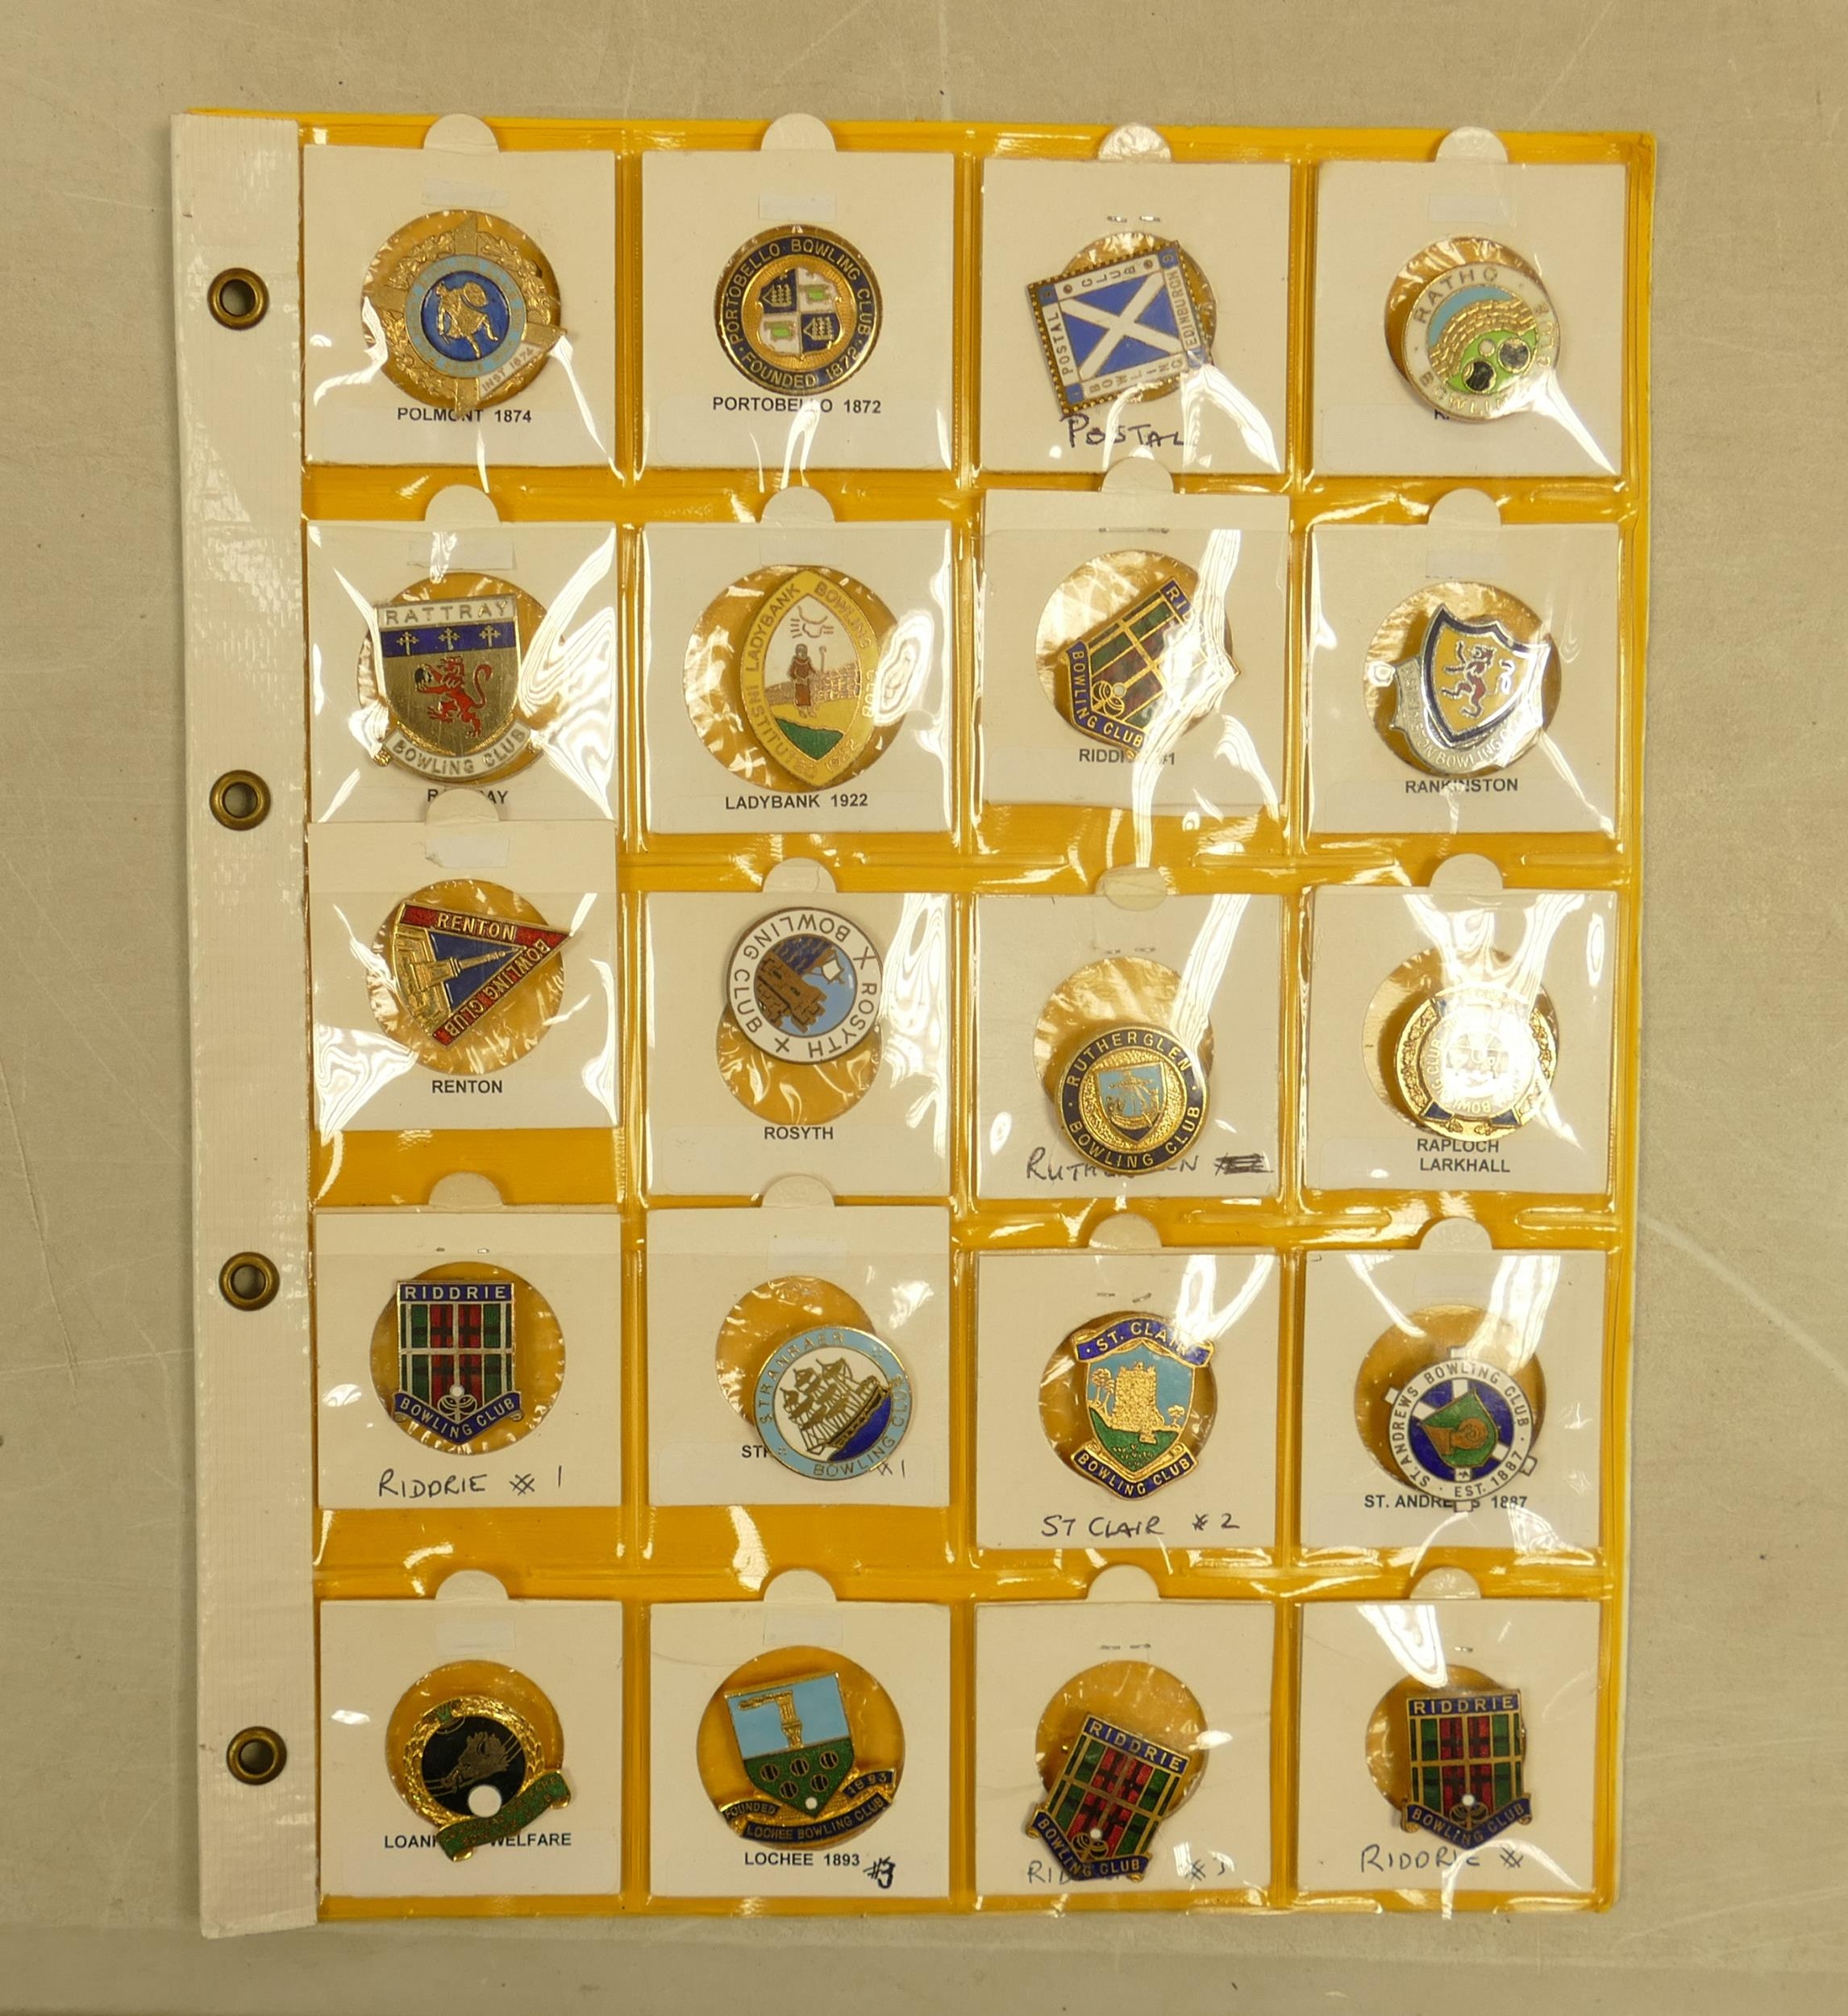 English Bowling club enamel badges x 20 on one page.This is one lot of 15 similar lots offered by us